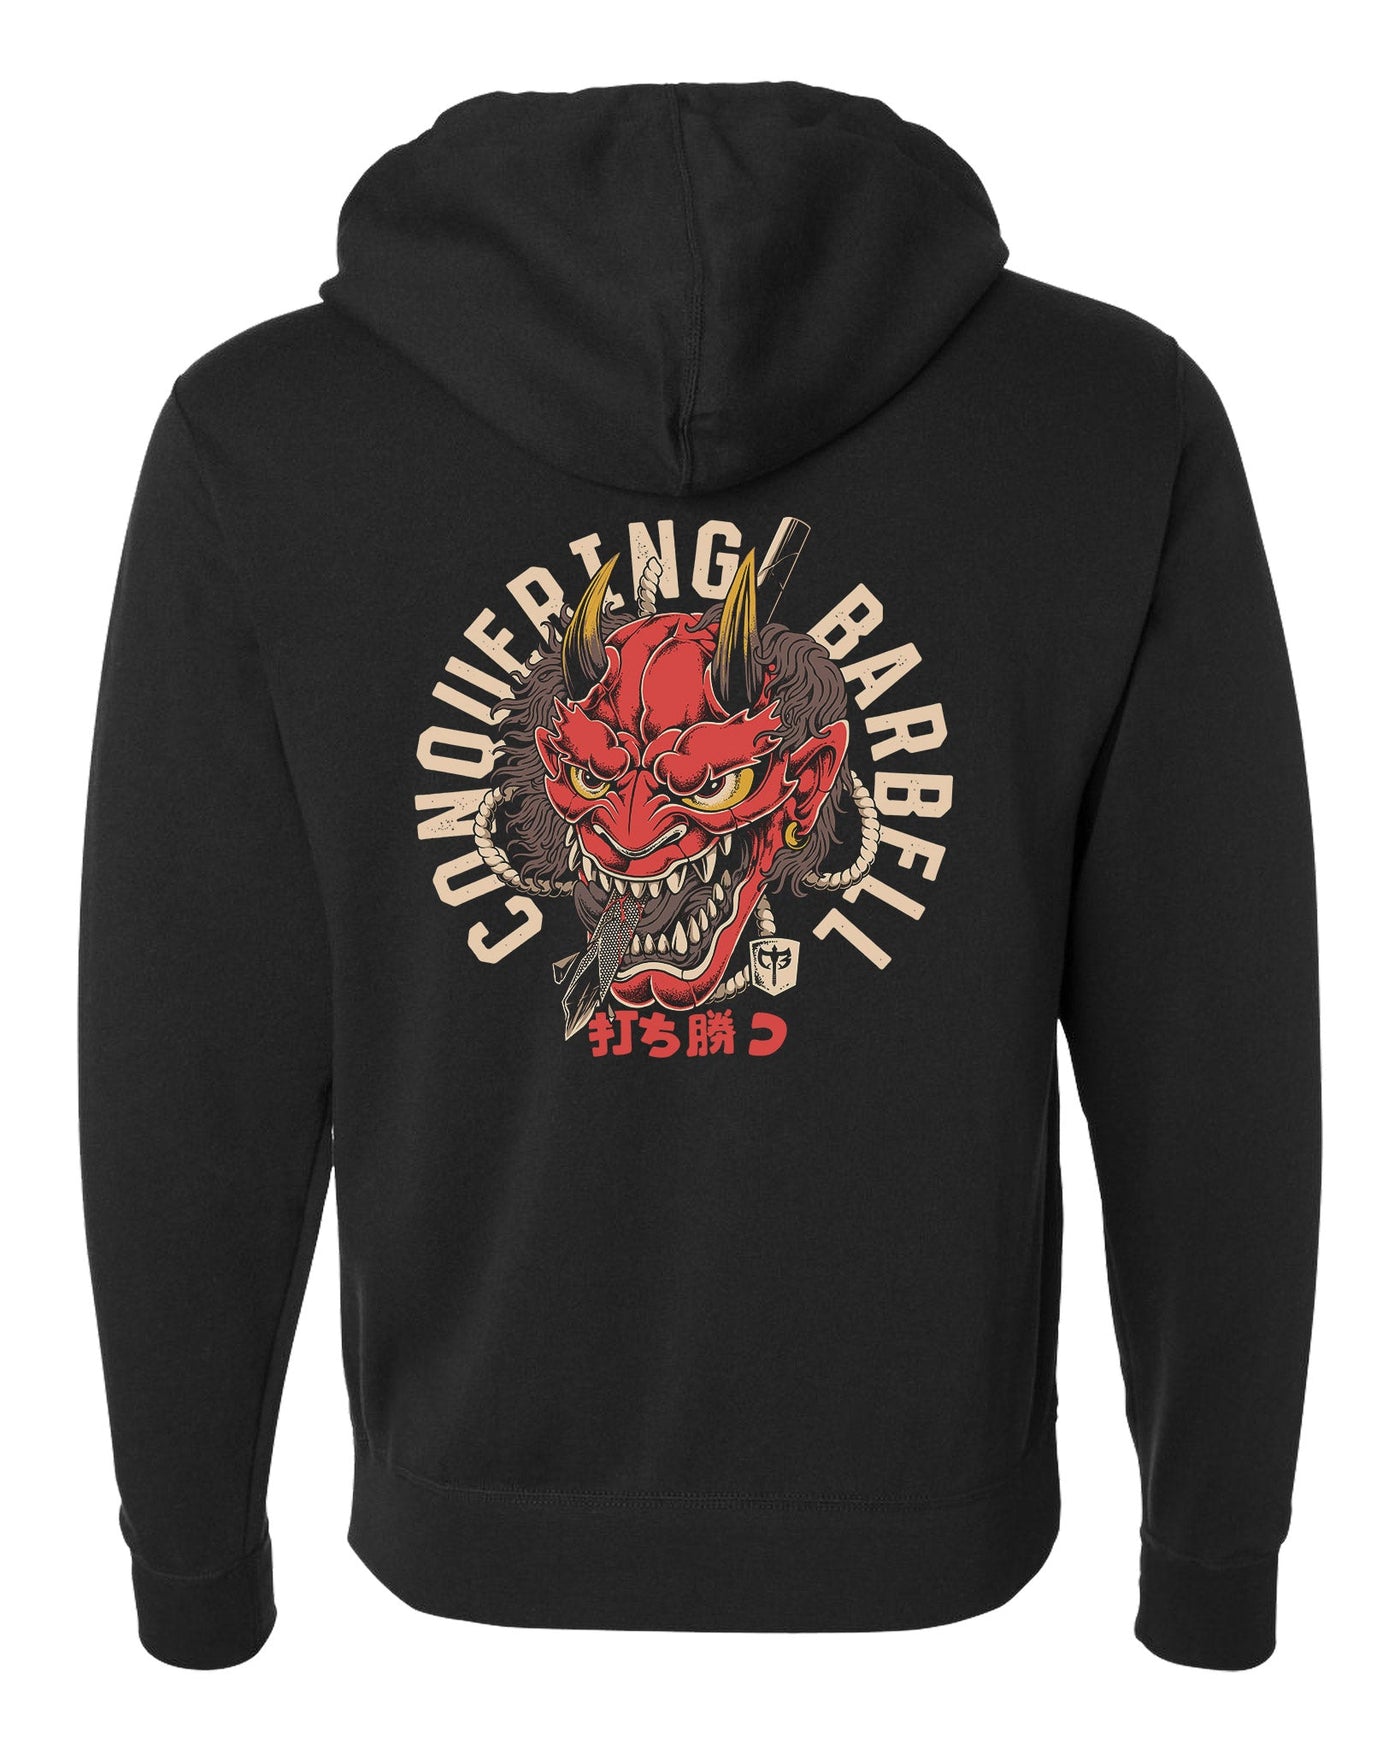 Conquer Your Demon - on Black Pullover Hoodie - Conquering Barbell